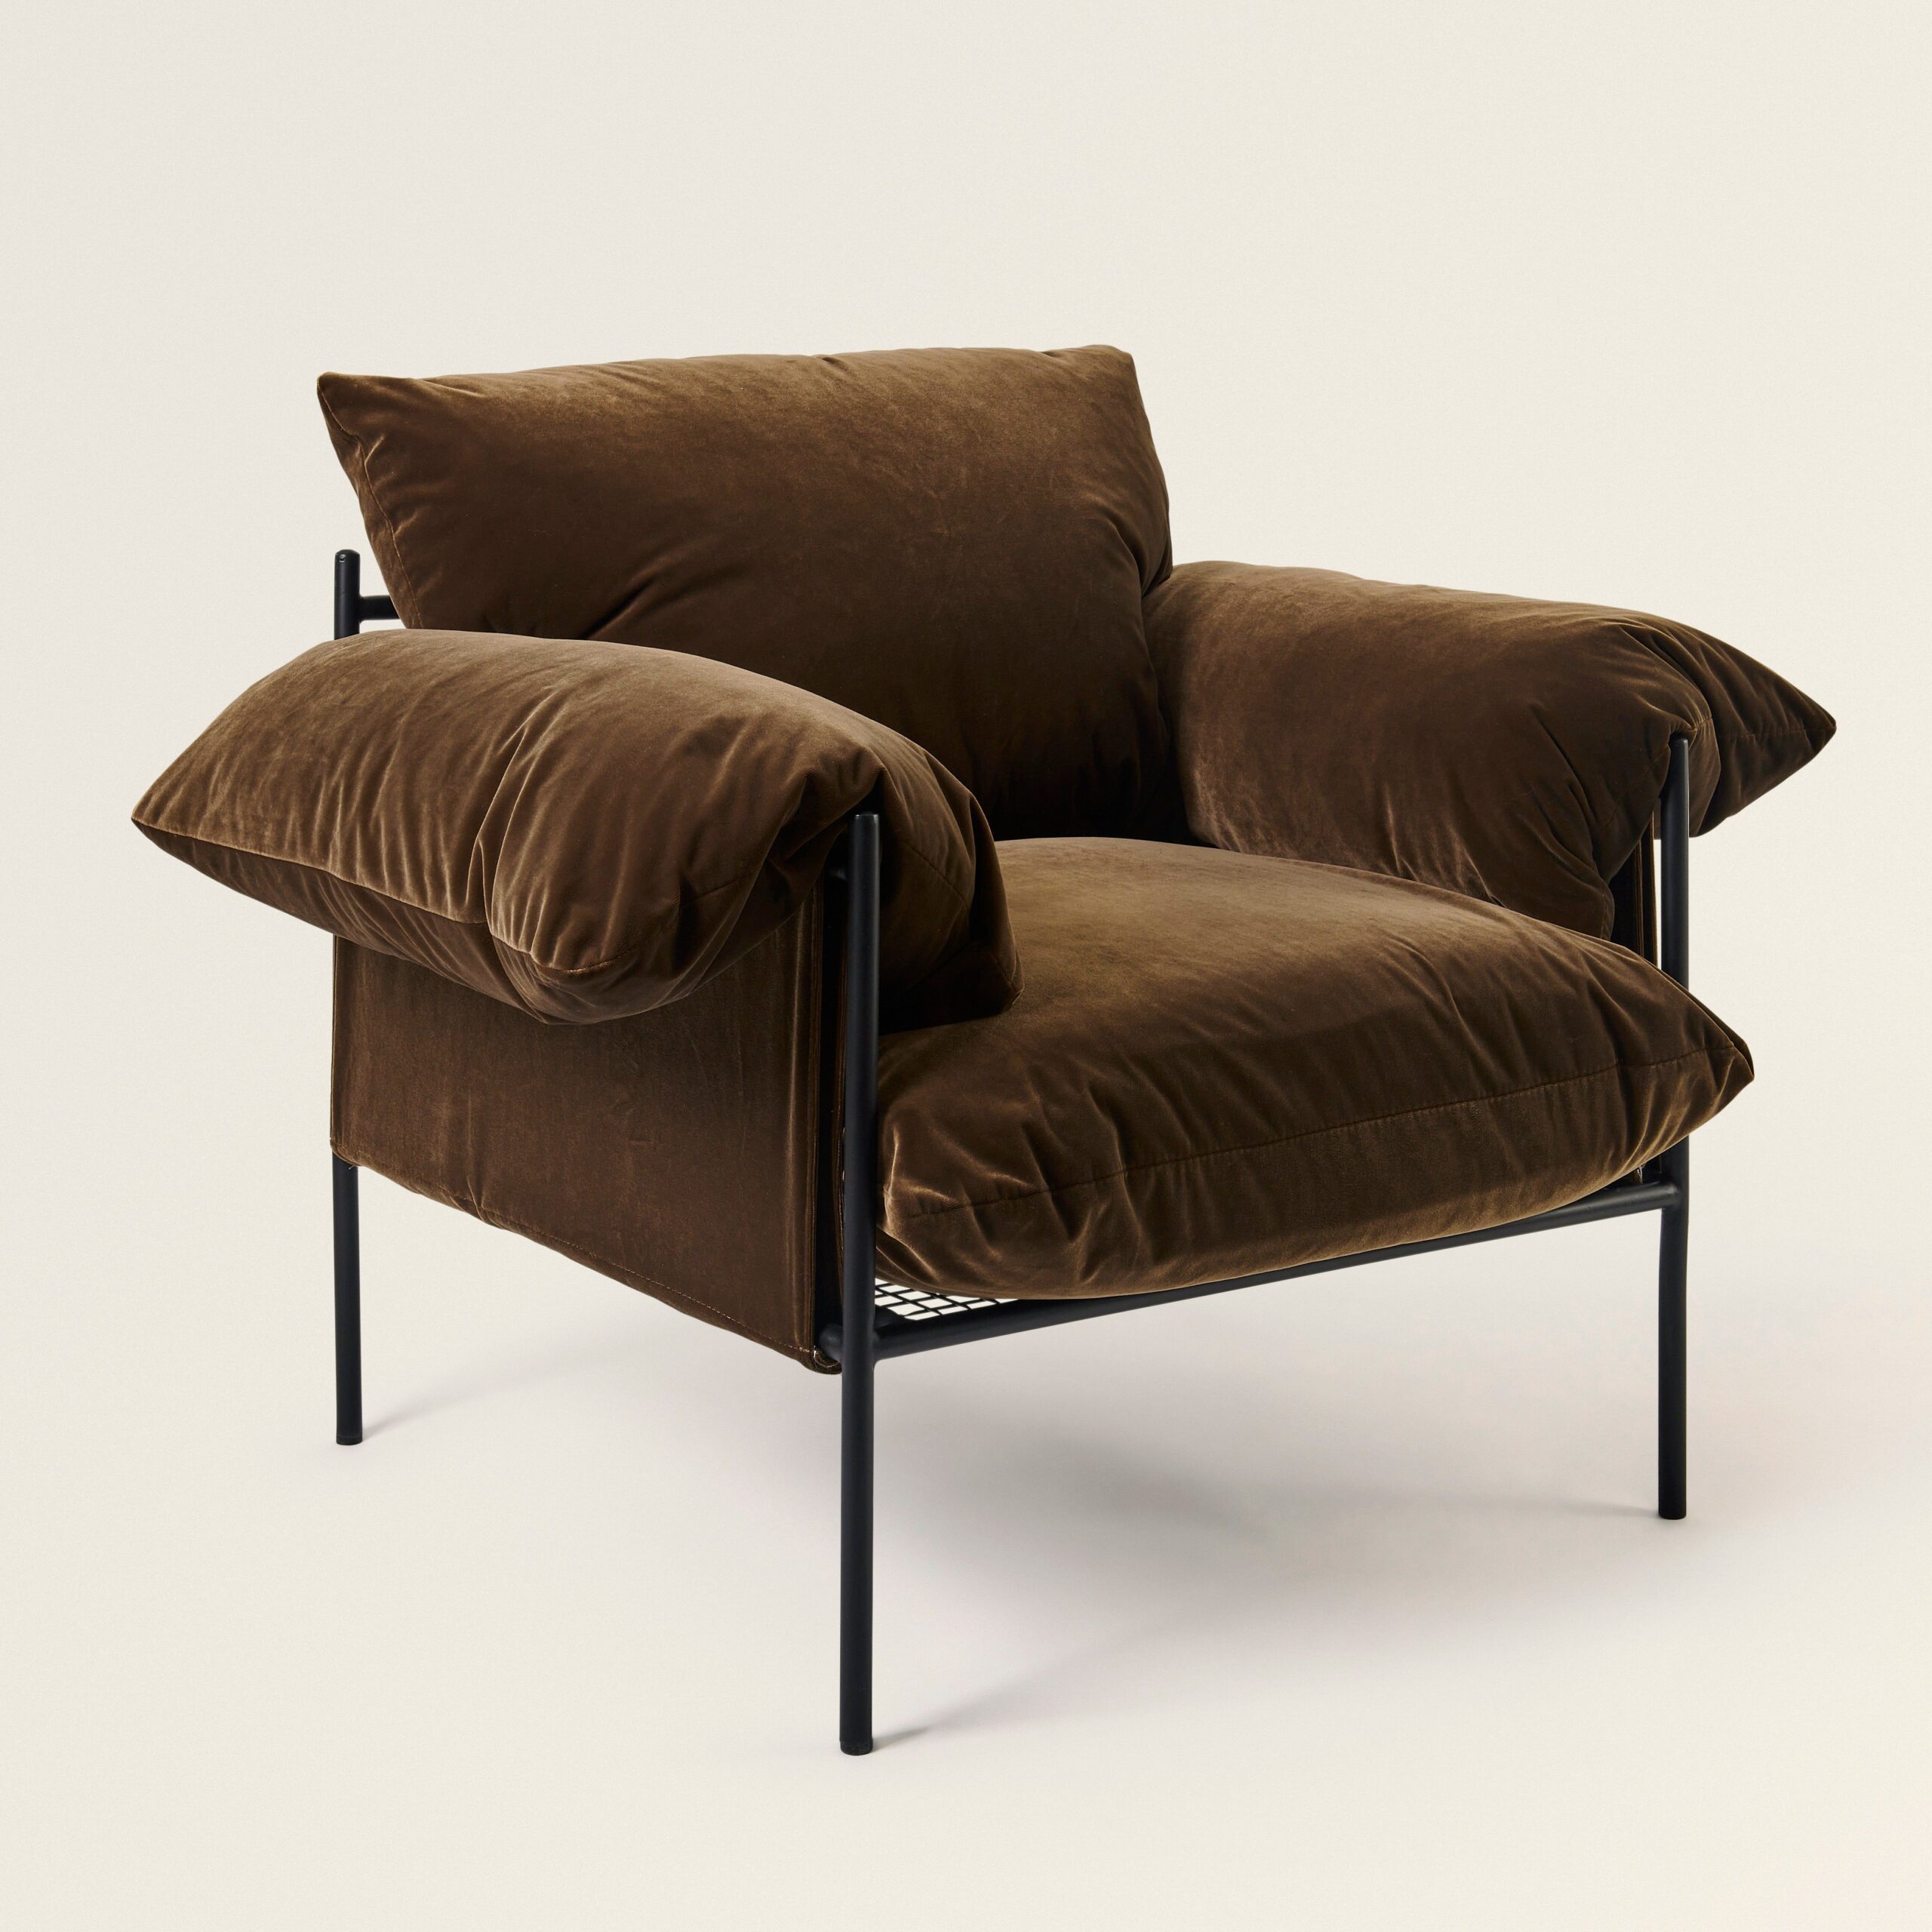 The Essential Piece of Furniture for Relaxation: The Lounge Chair